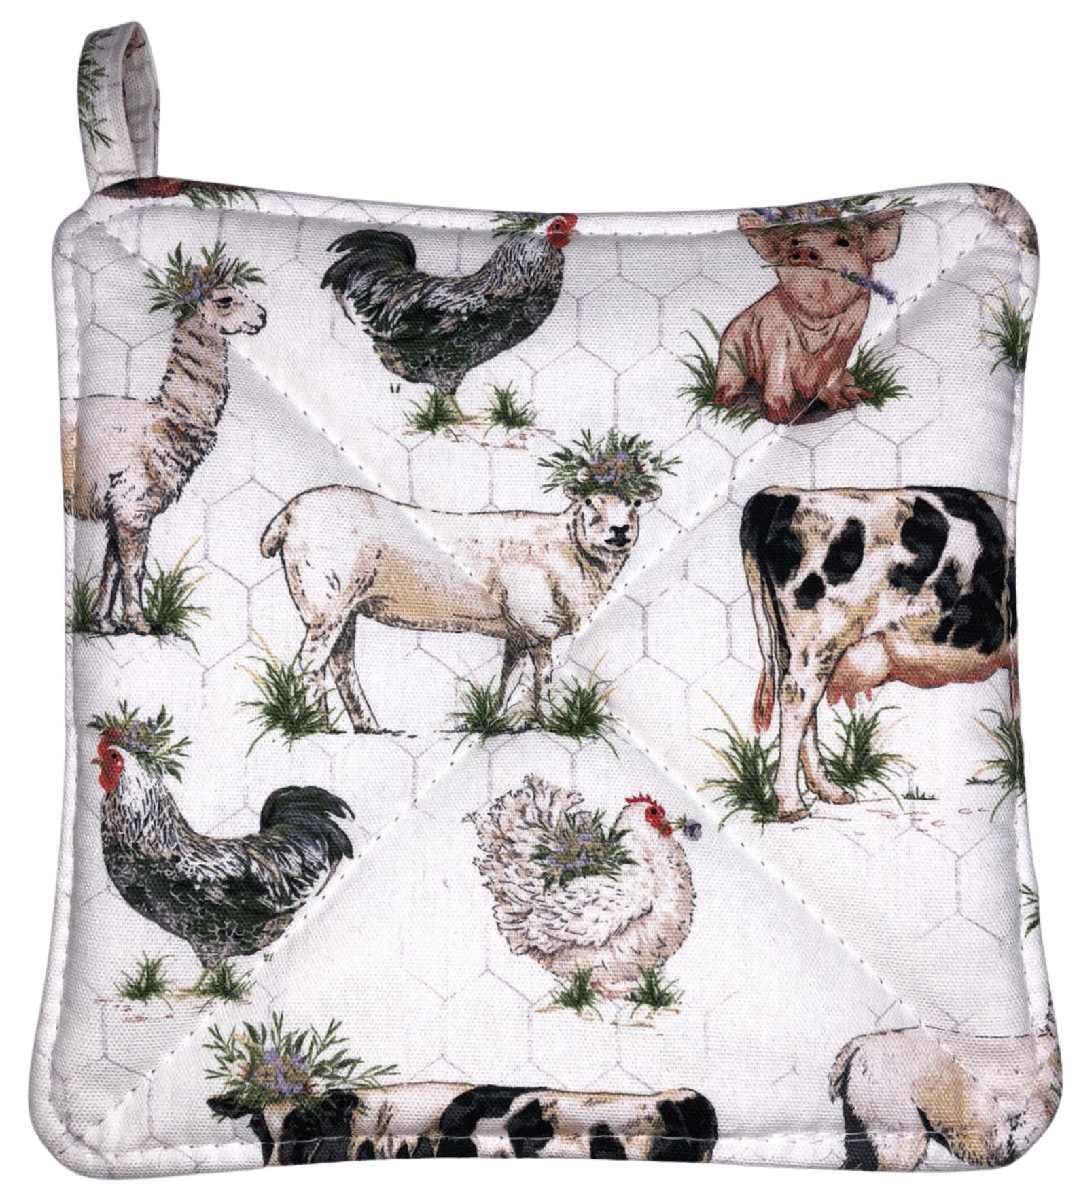 Farm Animal Kitchen Pot Holder Cow Rooster Pig Farmhouse Hot Pad Quilted Potholder